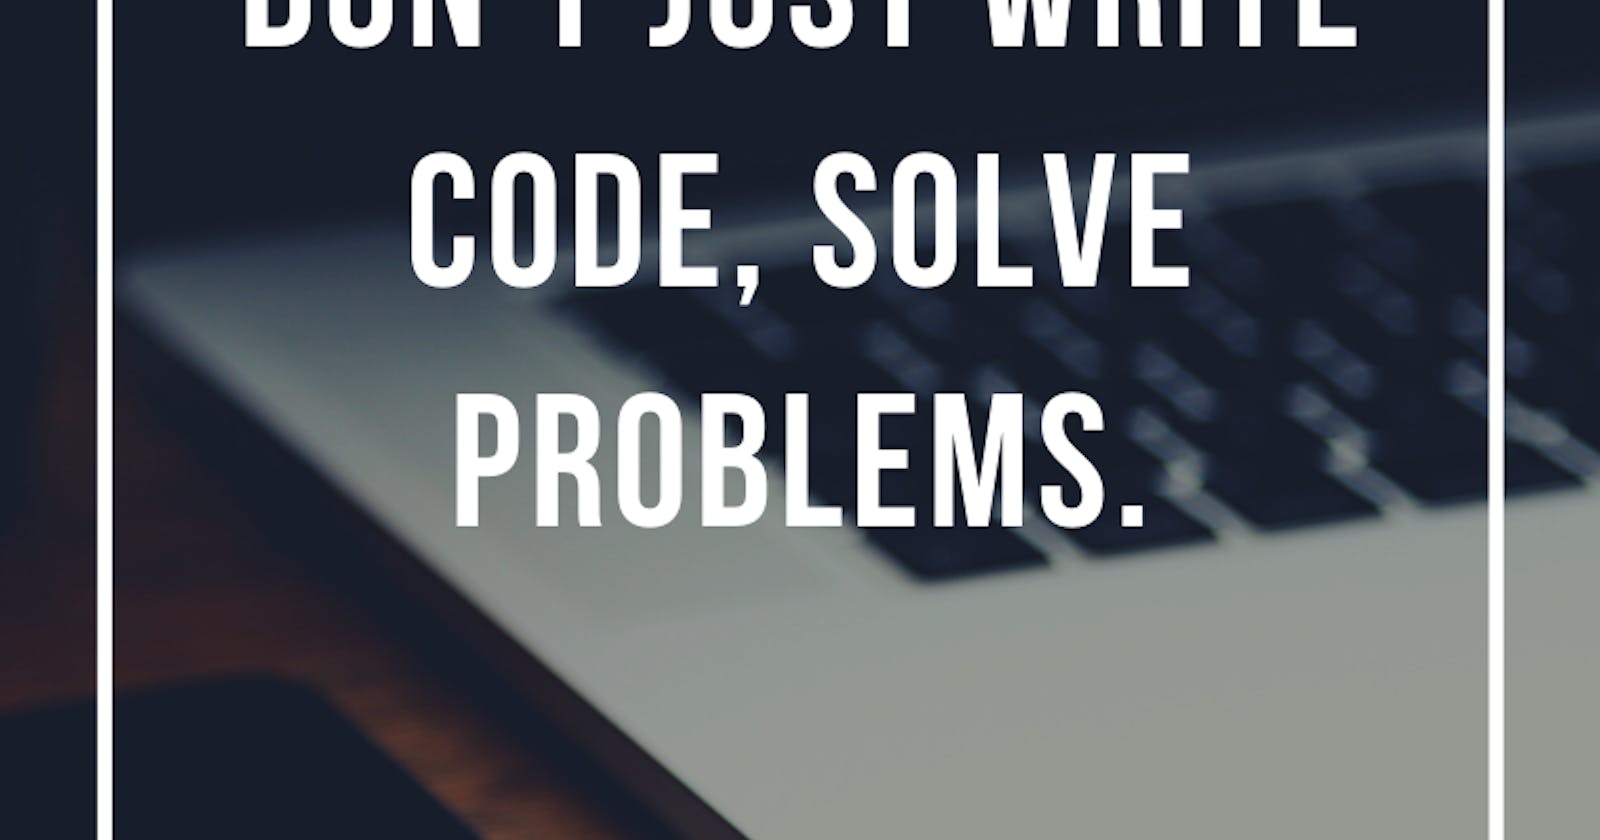 Don't just write codes, solve problems. 
How to be better at coding.